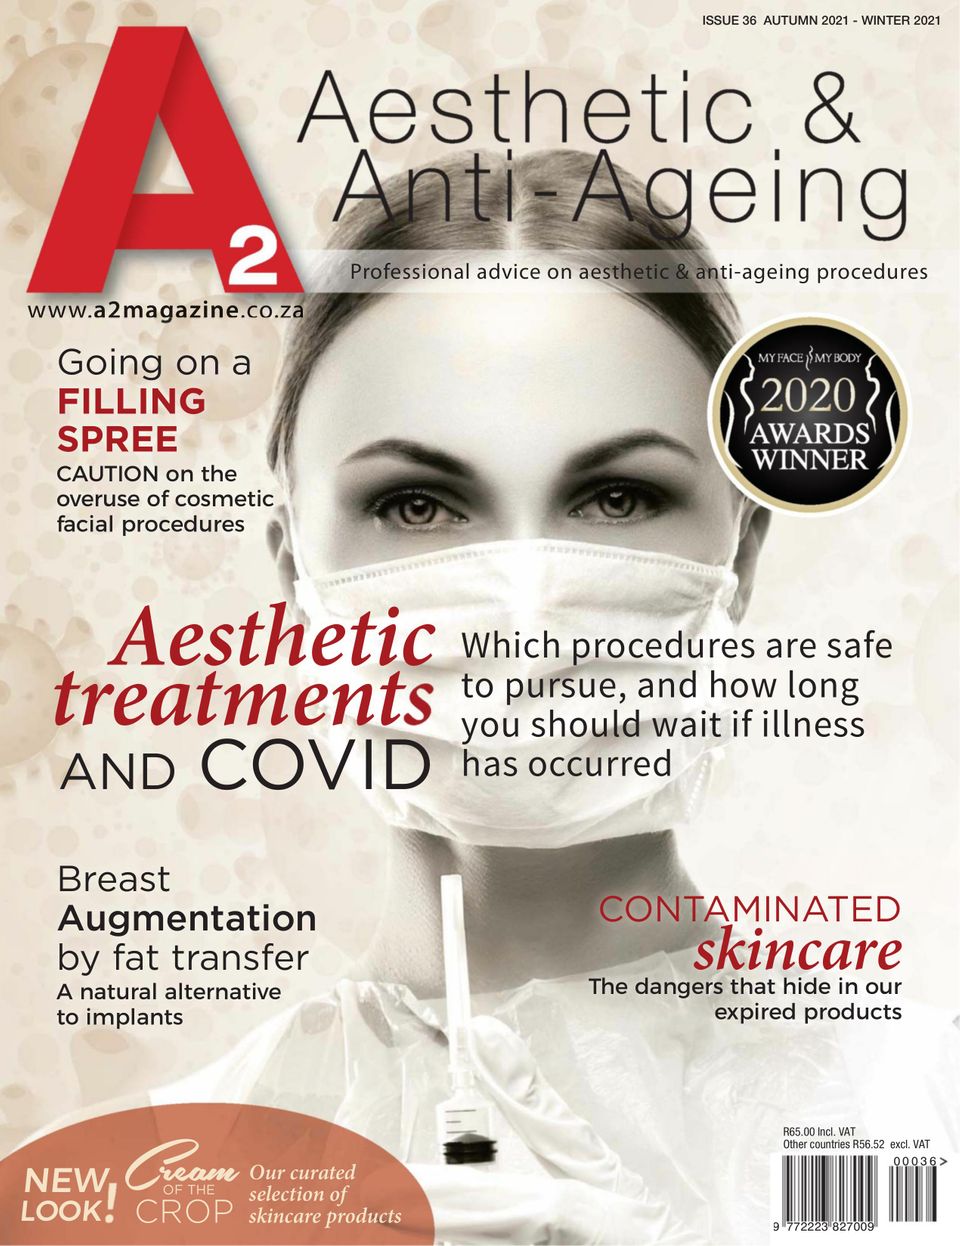 A2 Aesthetic And Anti Ageing March 2021 June 2021 Issue 36 Digital 